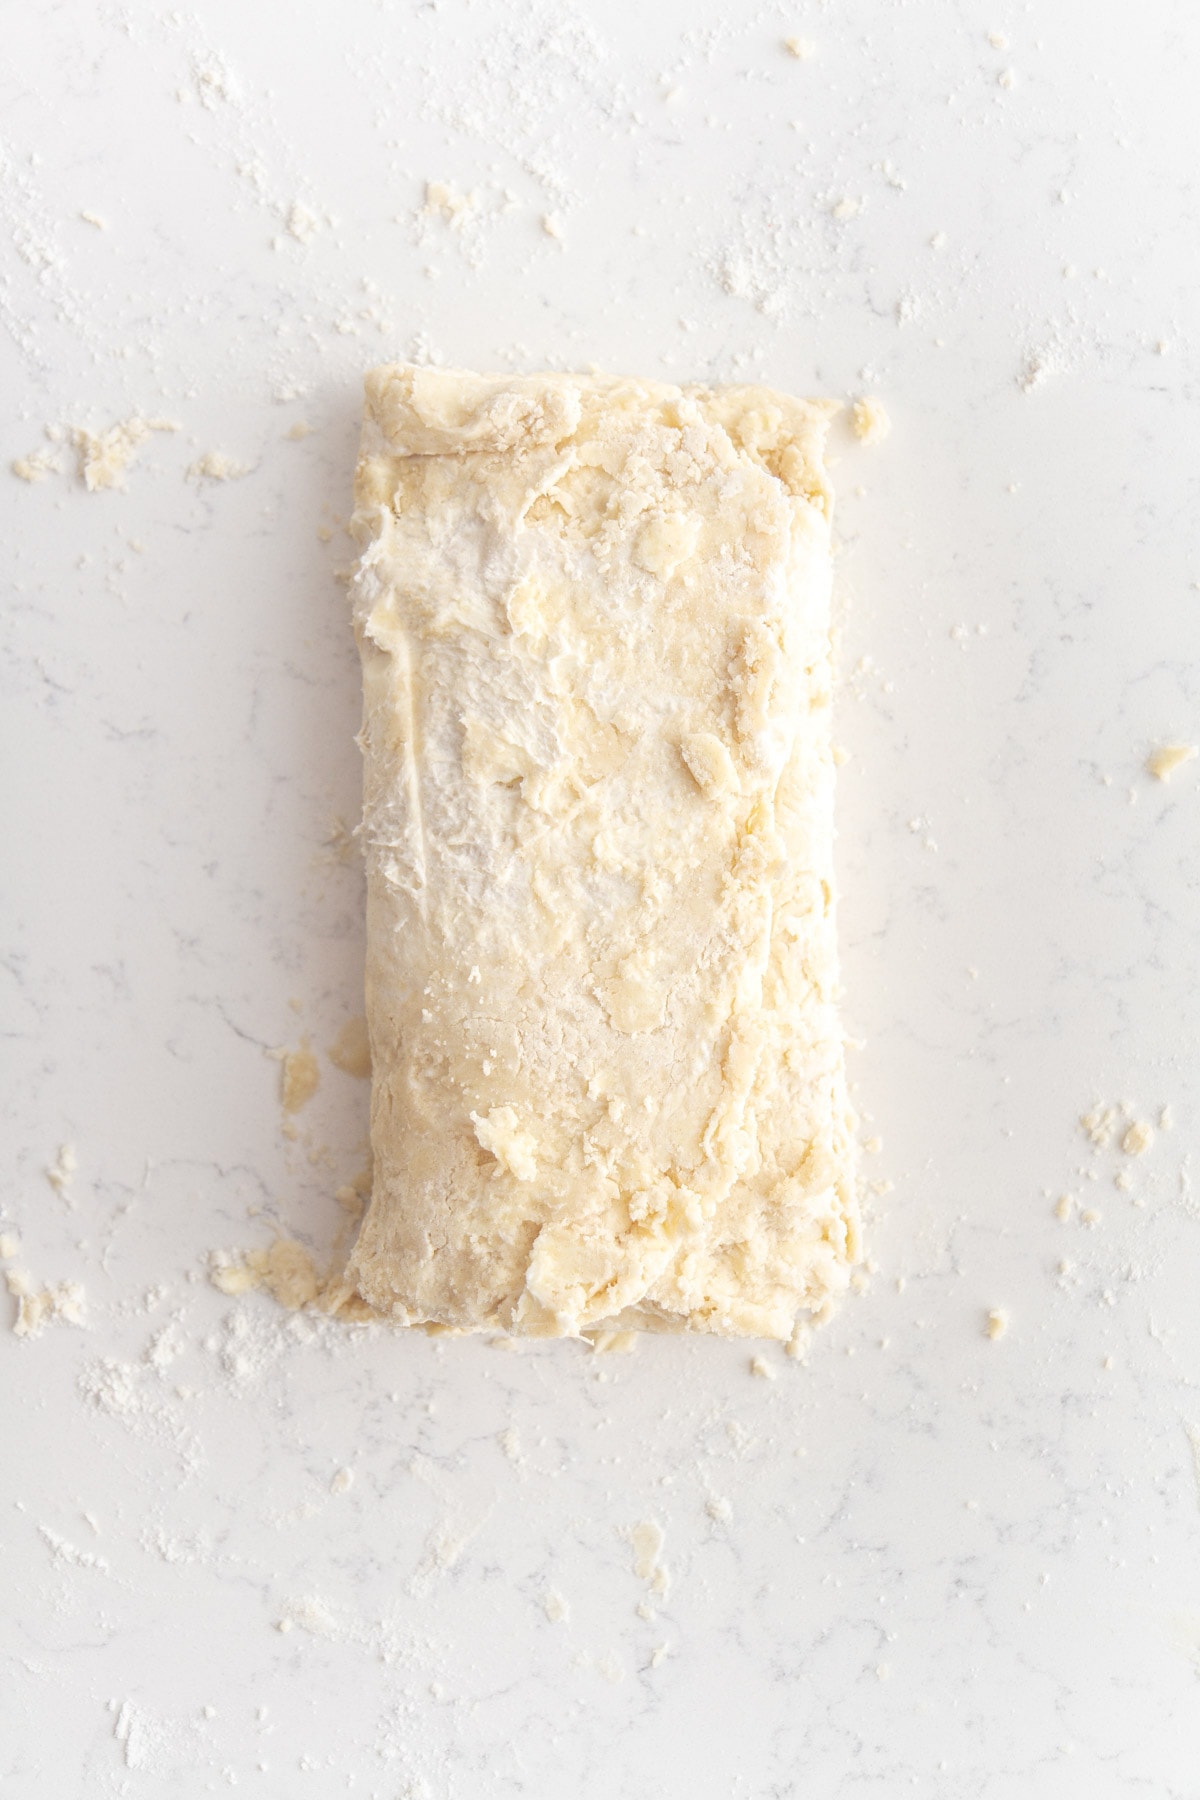 rough puff pastry dough folded like a business letter